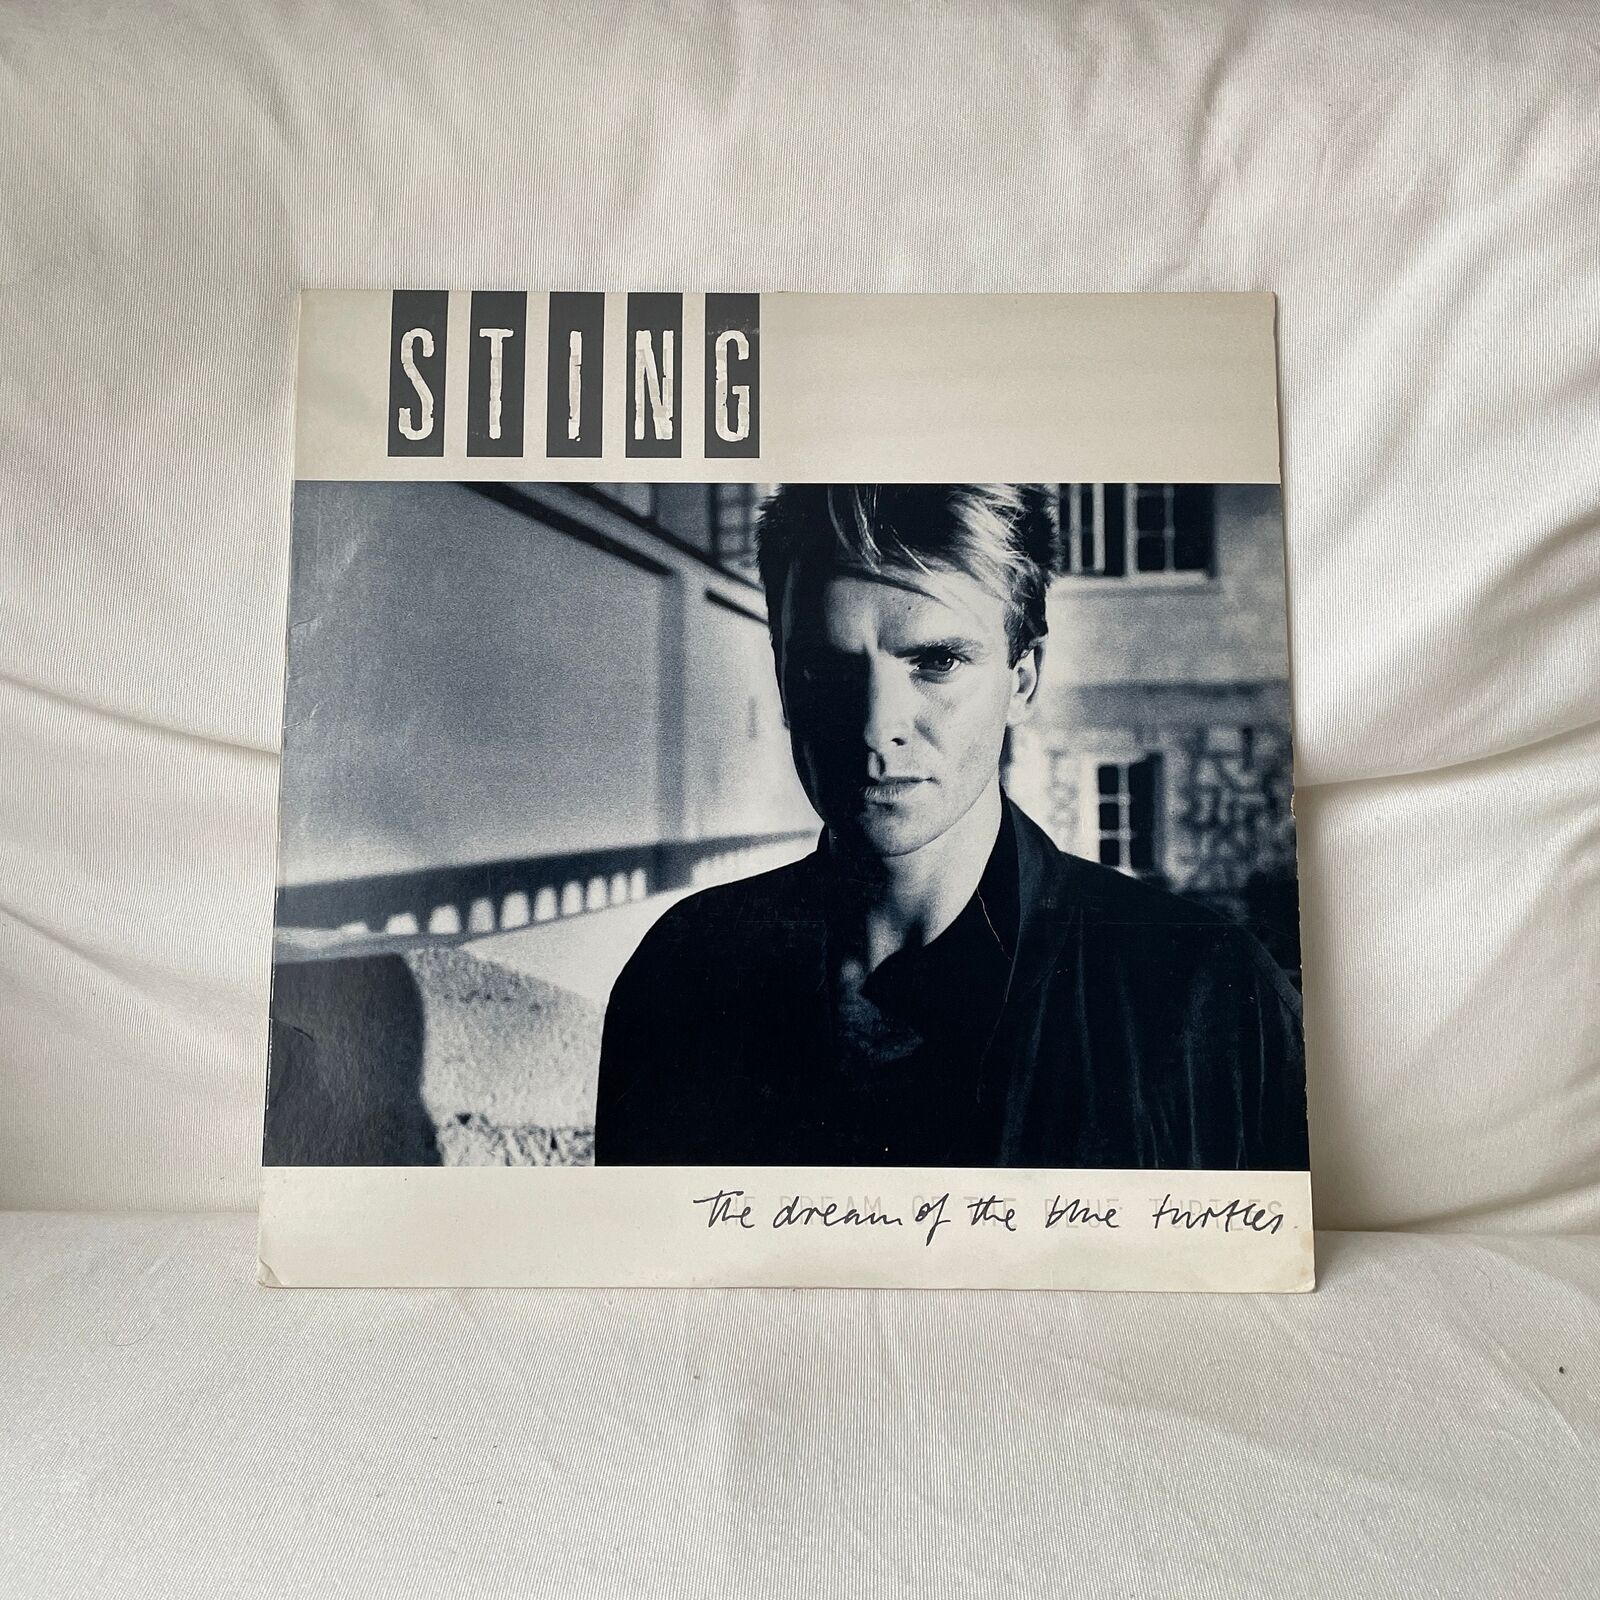 Sting - The Dream of the Blue Turtles - Vinyl LP Record - 1985